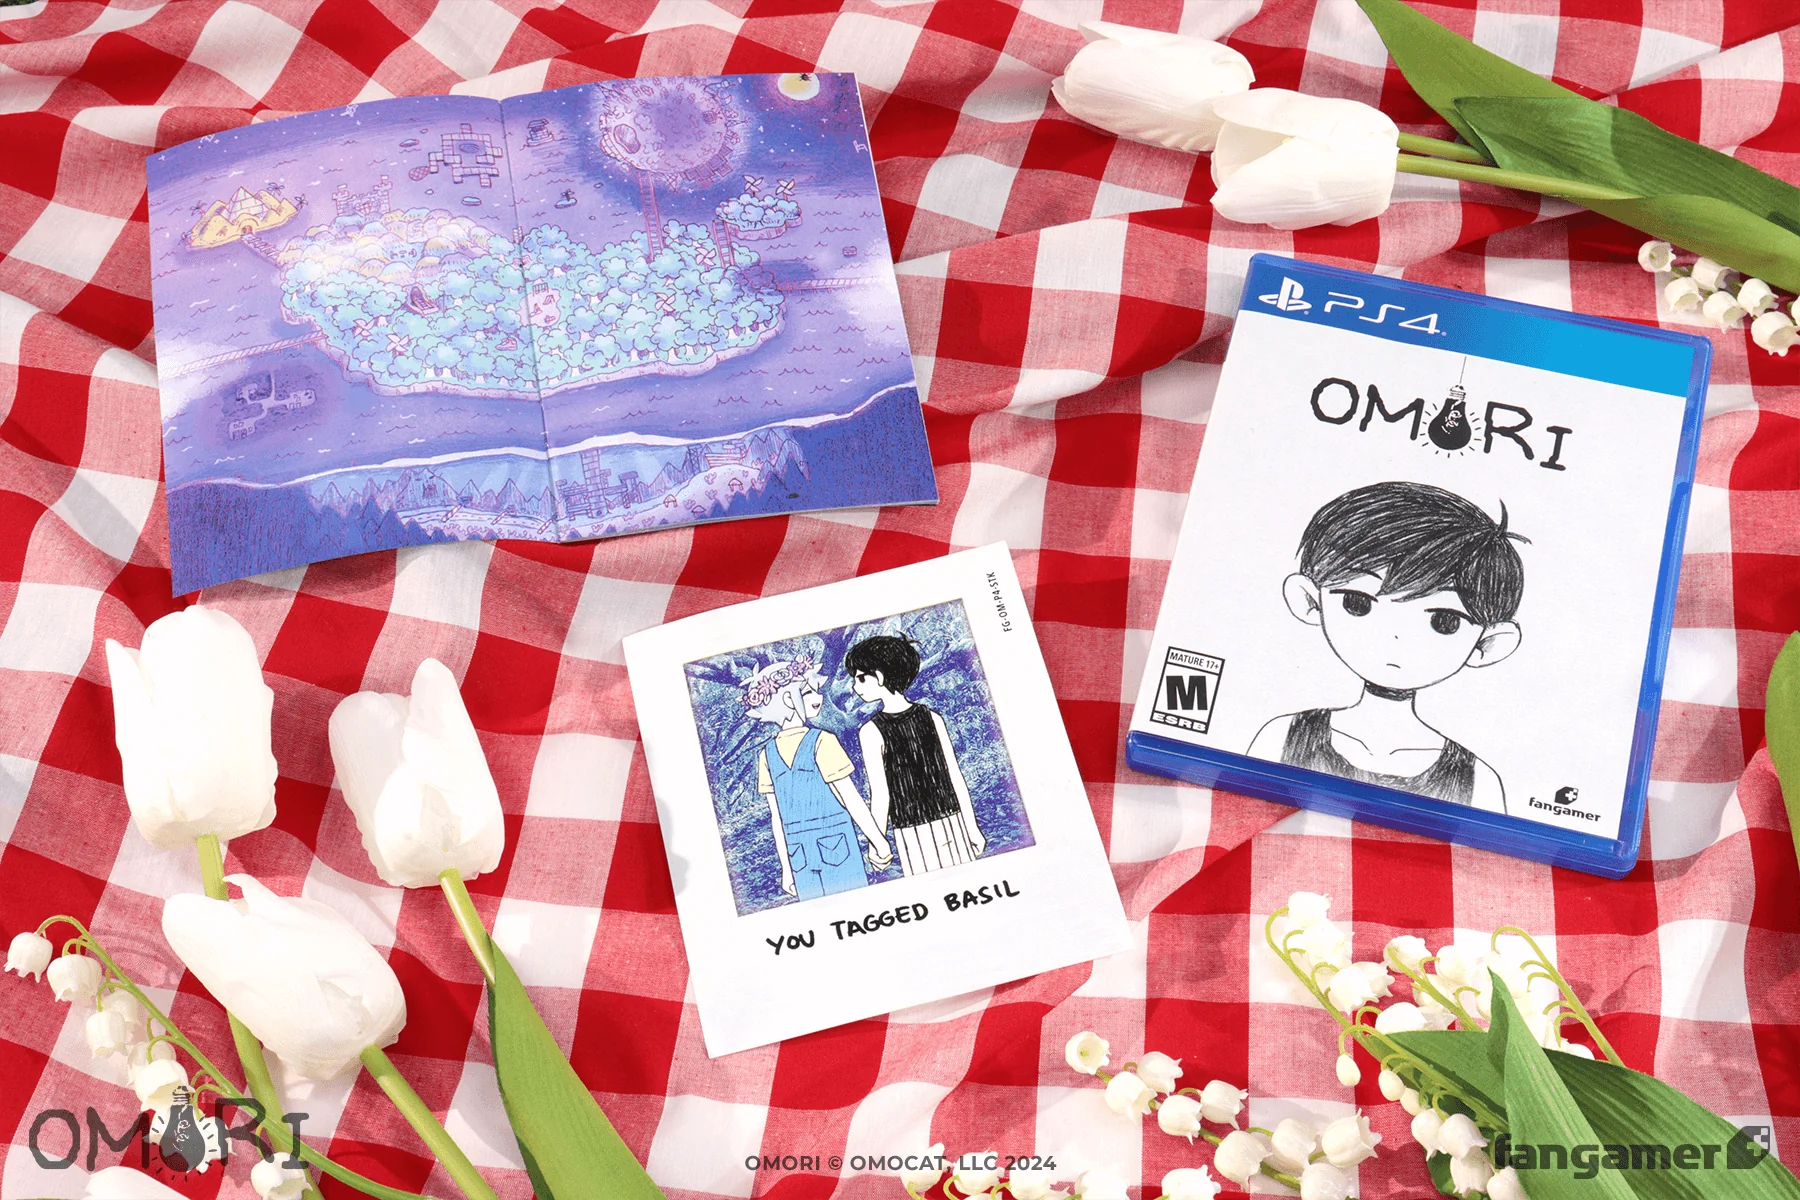 Omori Launches 3rd Anniversary Concert Online, Game Collector’s Edition Announced for Pre-Order; Manga Releasing Spring 2024